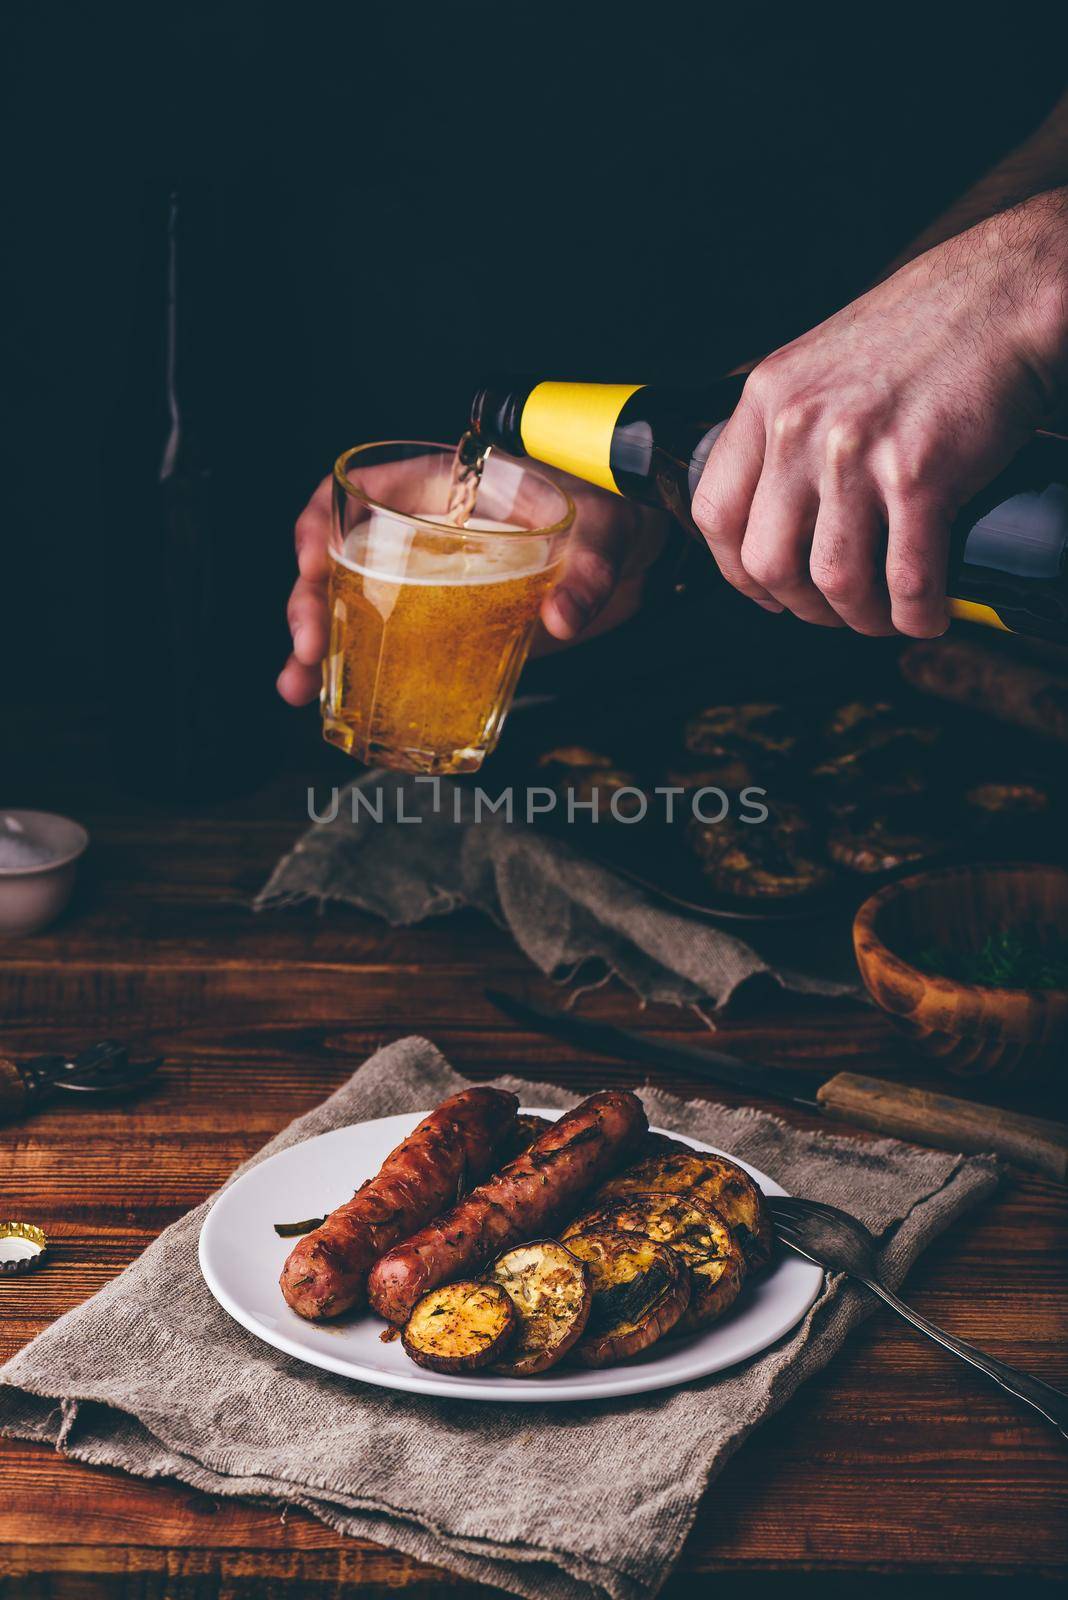 Pork Sausages Baked with Eggplant, Leek and Herbs on White Plate. Man Pouring Beer from Bottle into a Glass.